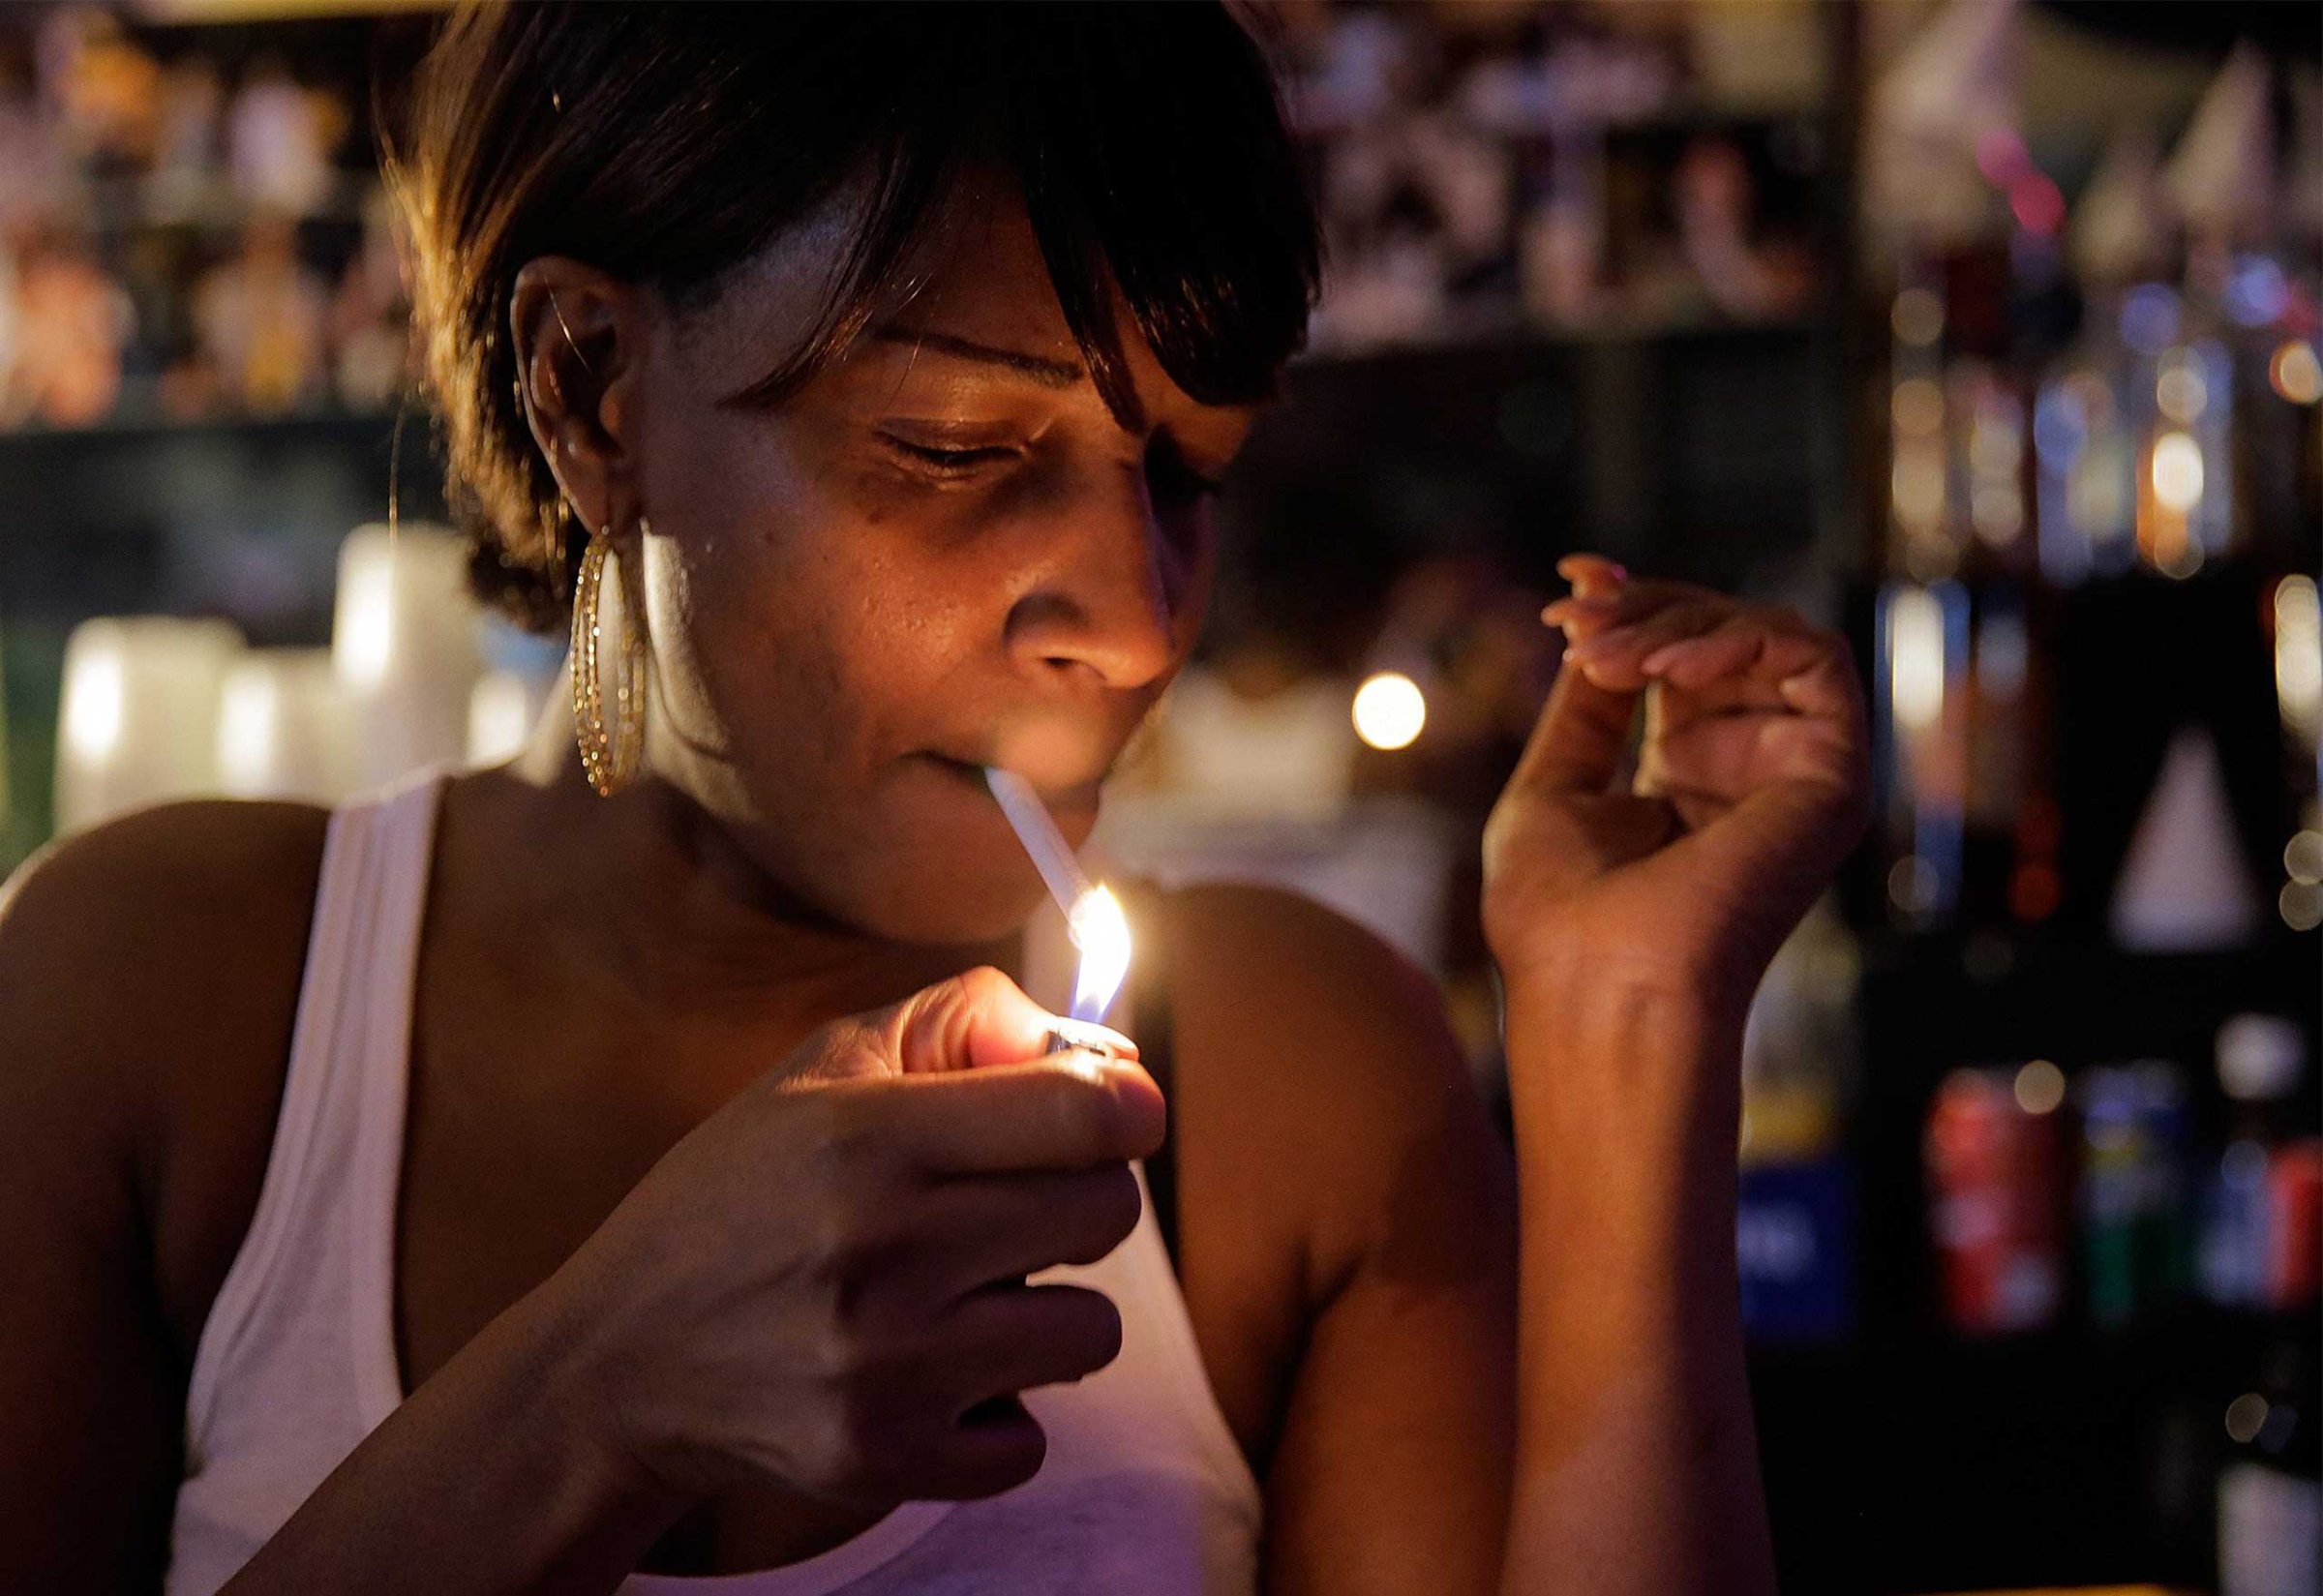 Judy Hill, owner of the Ooh Poo Pah Doo Bar in New Orleans, enjoys a smoke just days before the new city smoking ordinance on April 17, 2015.